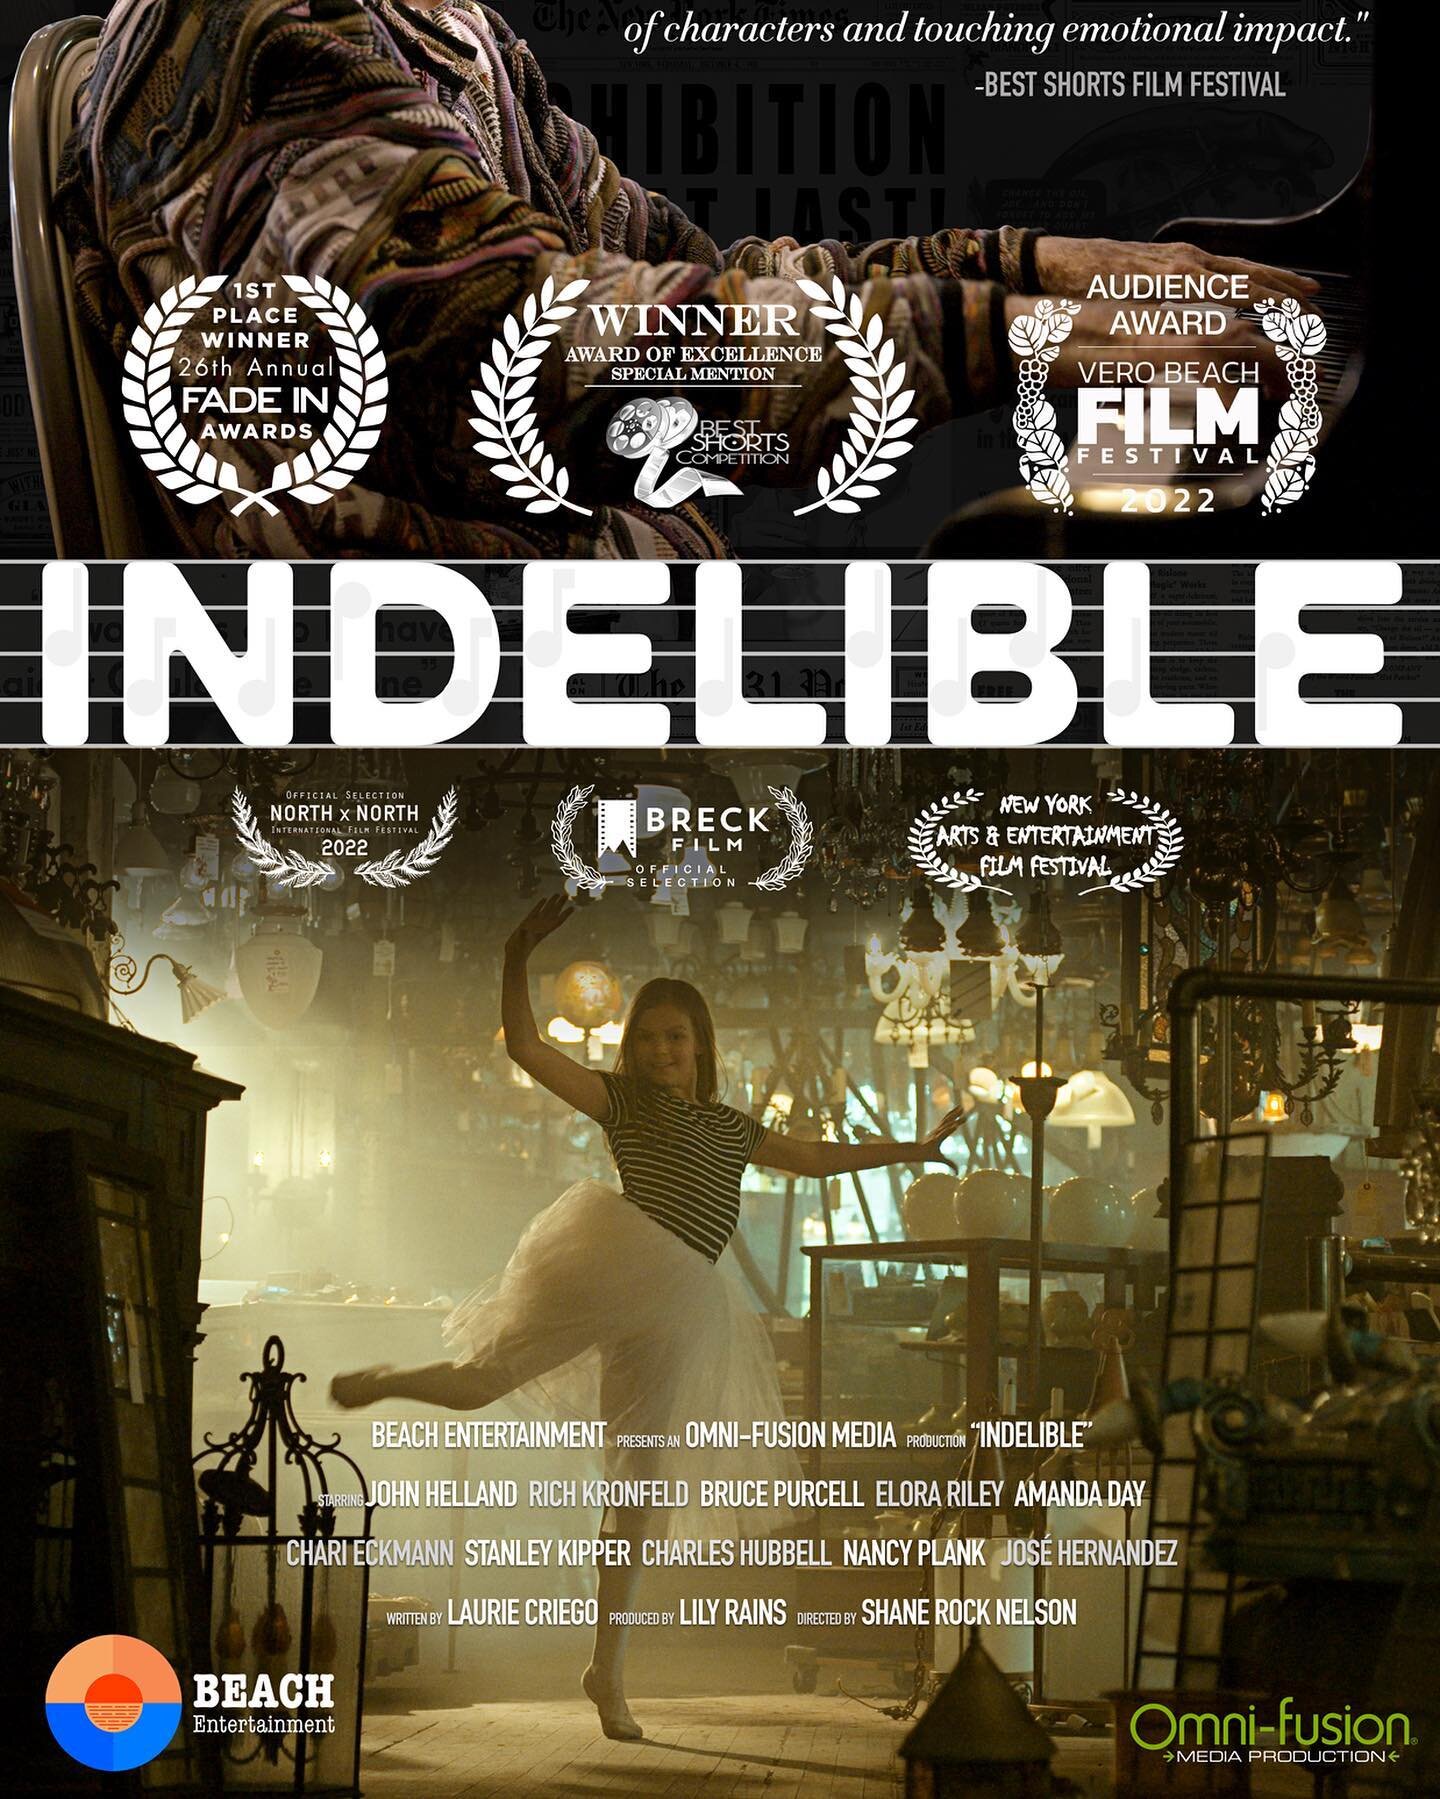 Indelible won some more awards &amp; will be screening in a few more fests. Made a link with info: www.Omni-Fusion.com/indelible 
Thanks to everyone who made this film possible! @lauriecriego @jonnystuckmayer @lilyrains more folks in tags but literal